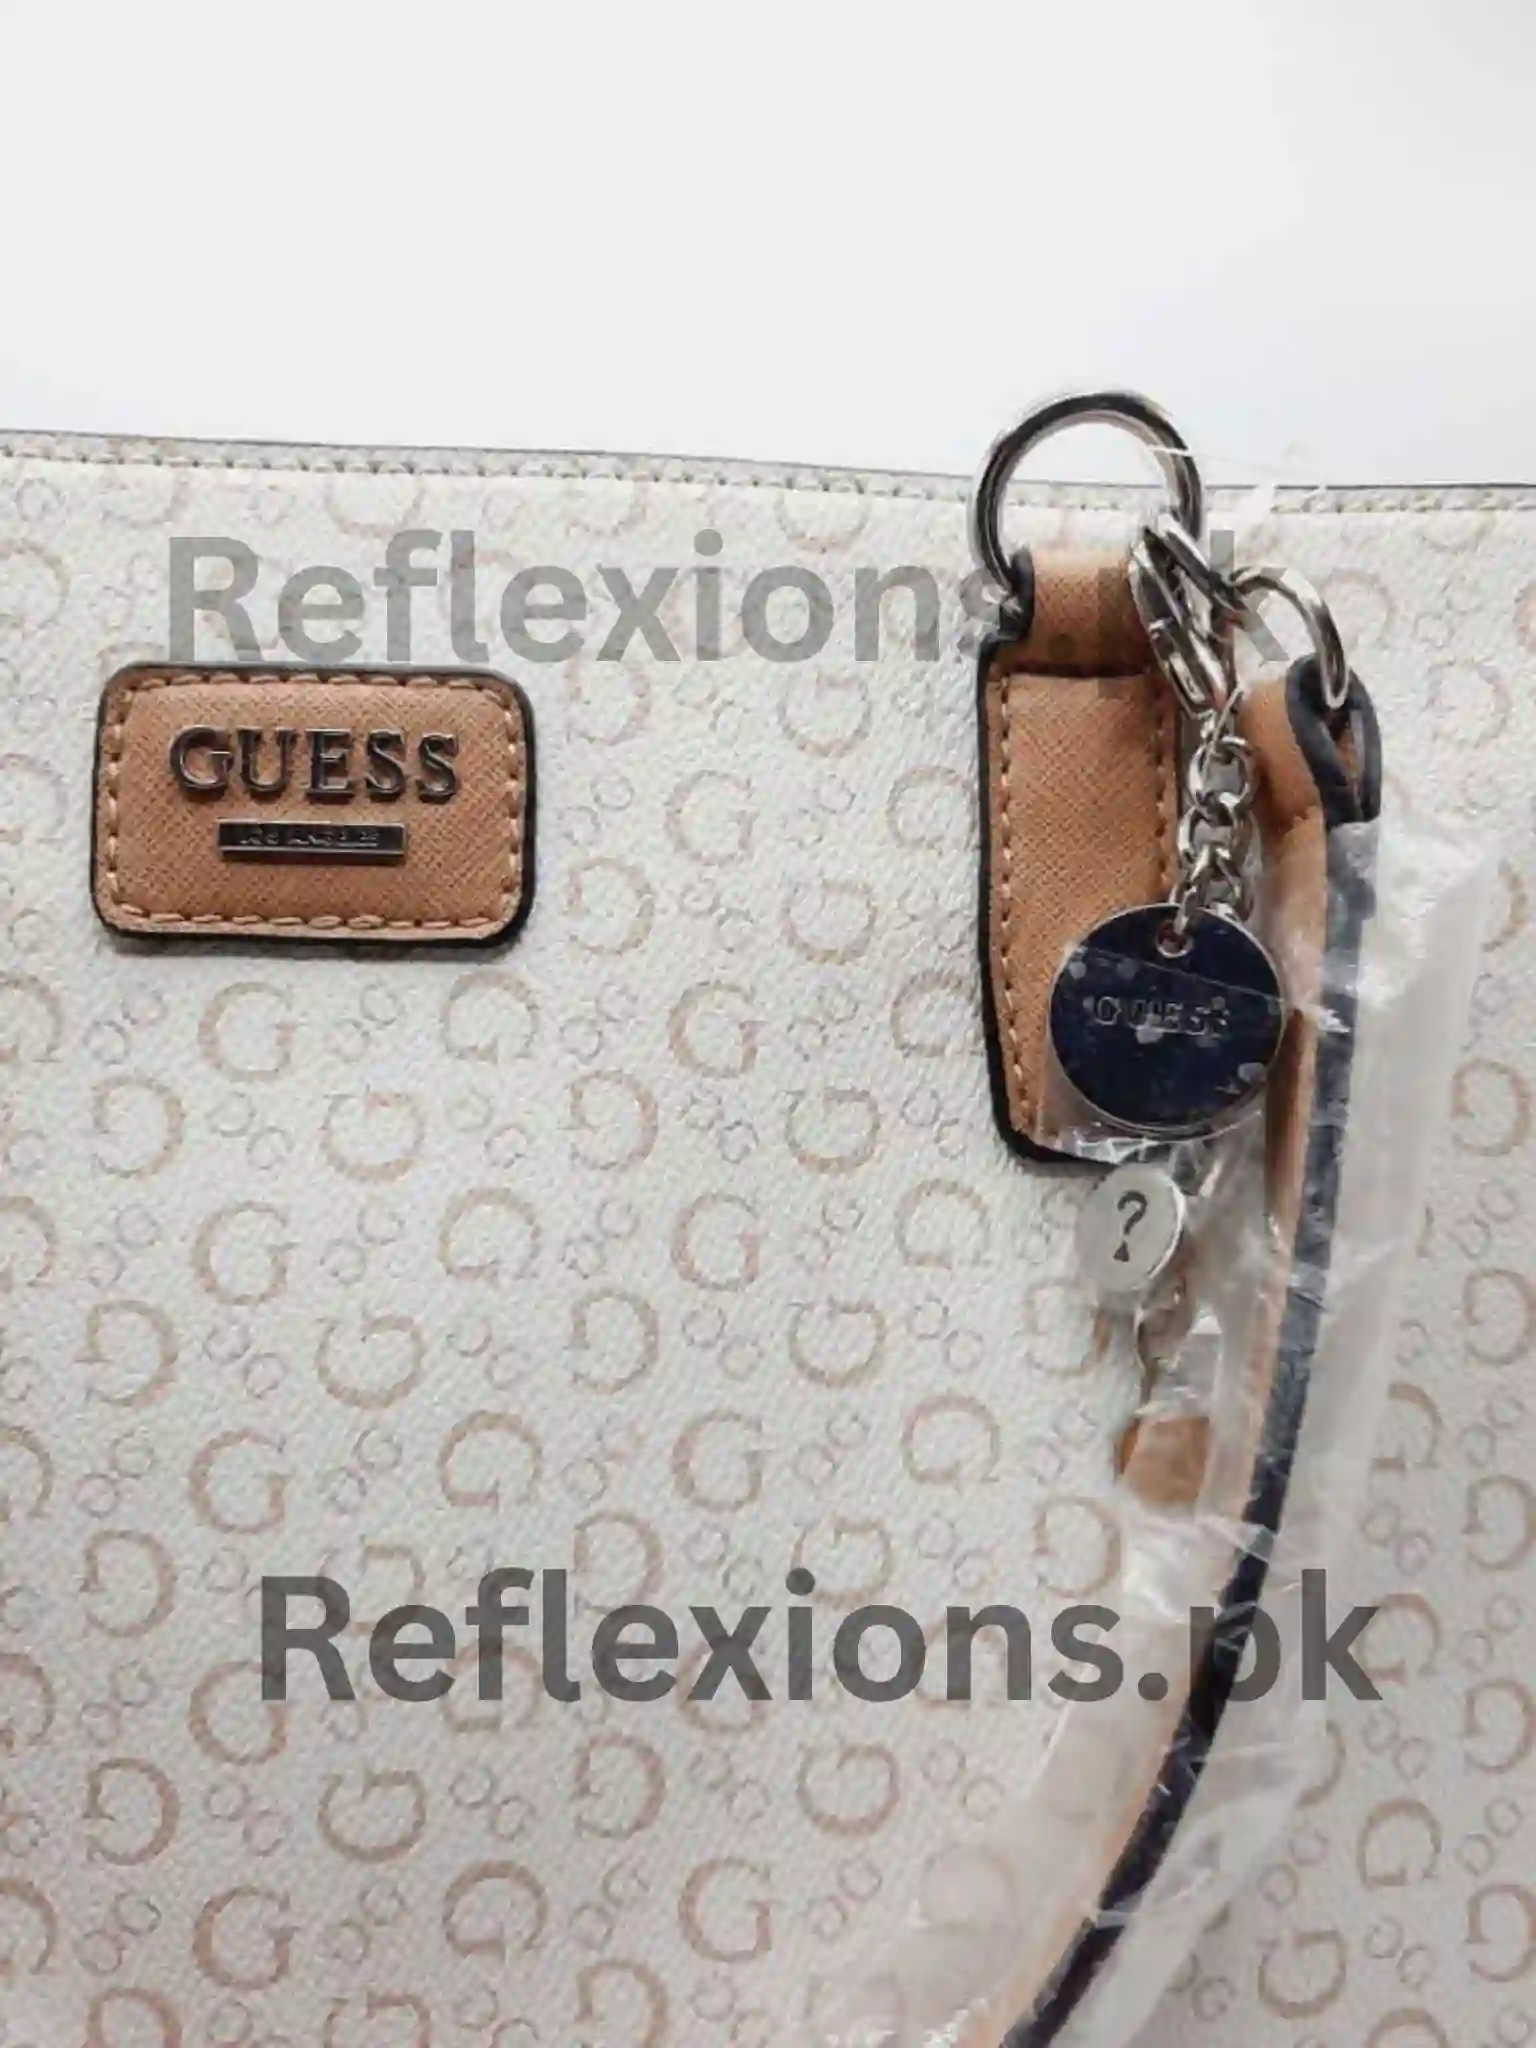 15 Famous and New Guess Bags for Women in India